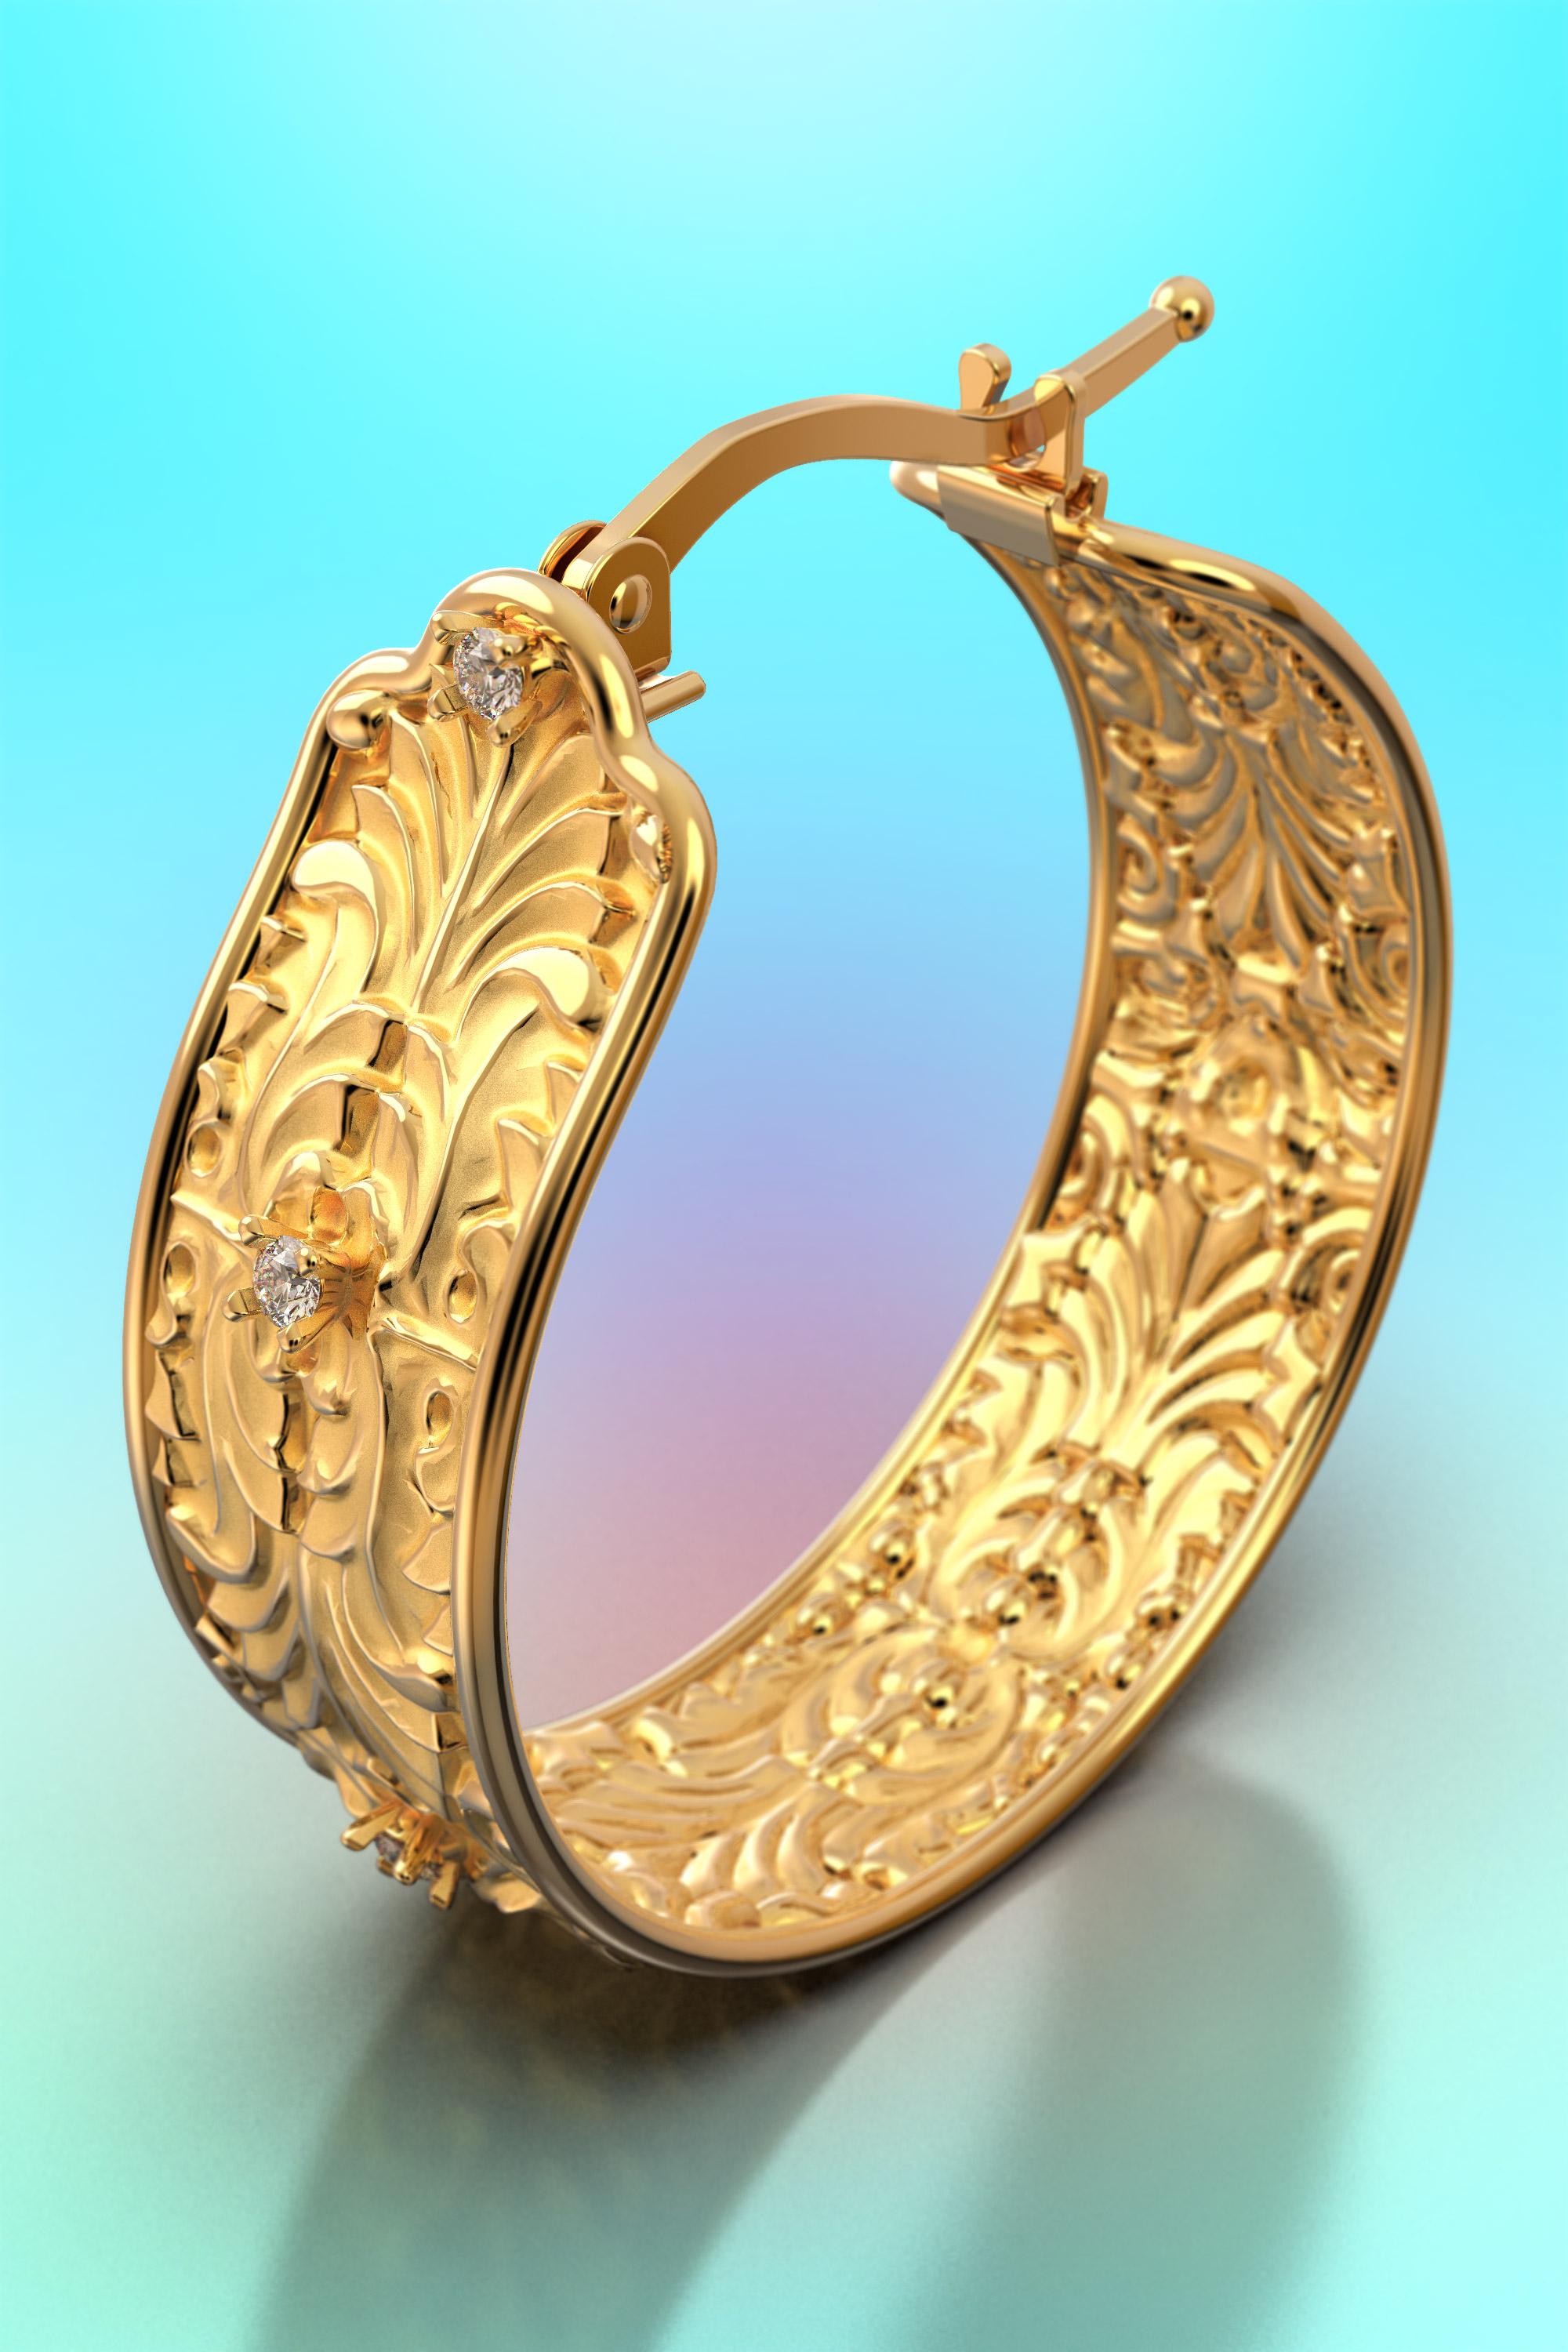 Oltremare Gioielli Baroque Hoop Earrings in 14k Gold with natural Diamonds For Sale 3